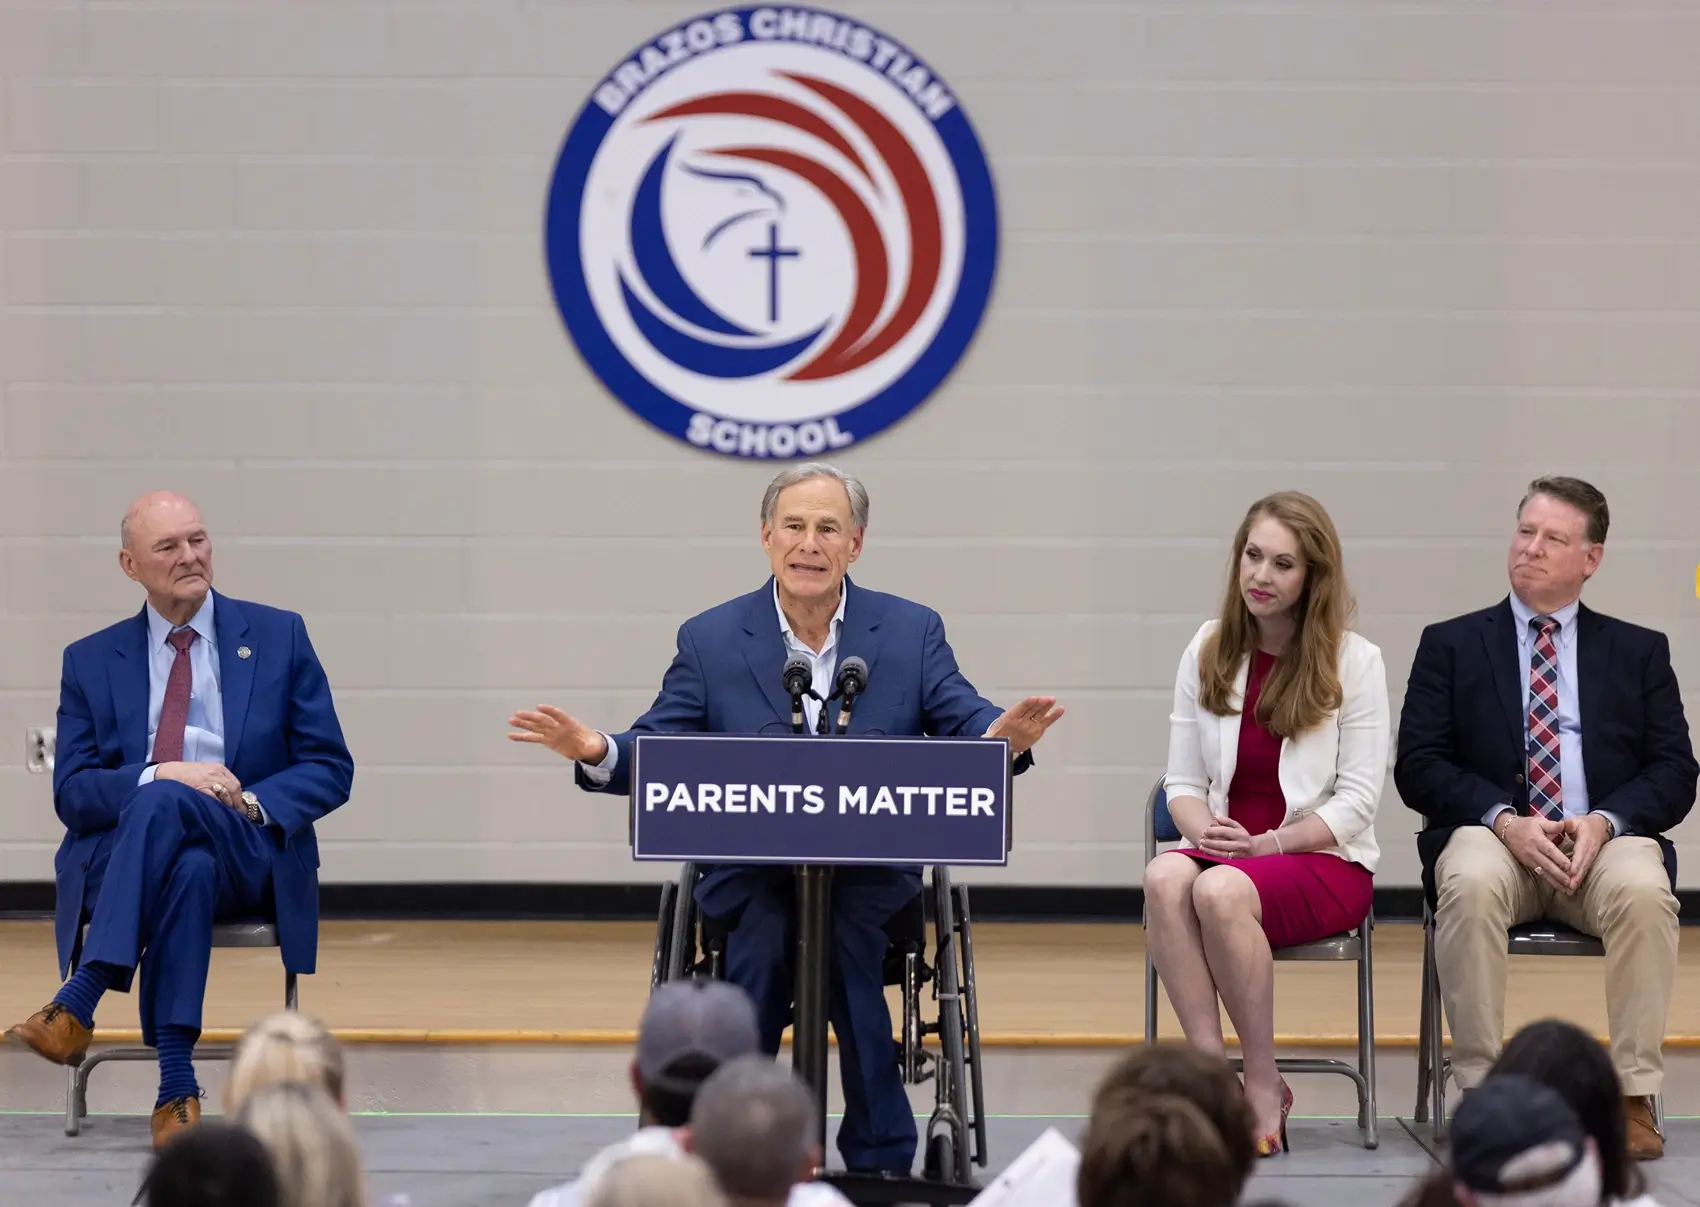 Texas Gov. Greg Abbott, center, speaks at Brazos Christian School in Bryan, Texas, on Tuesday, March 7, 2023. Abbott visited the school as a part of the Parent Empowerment Coalition's tour.